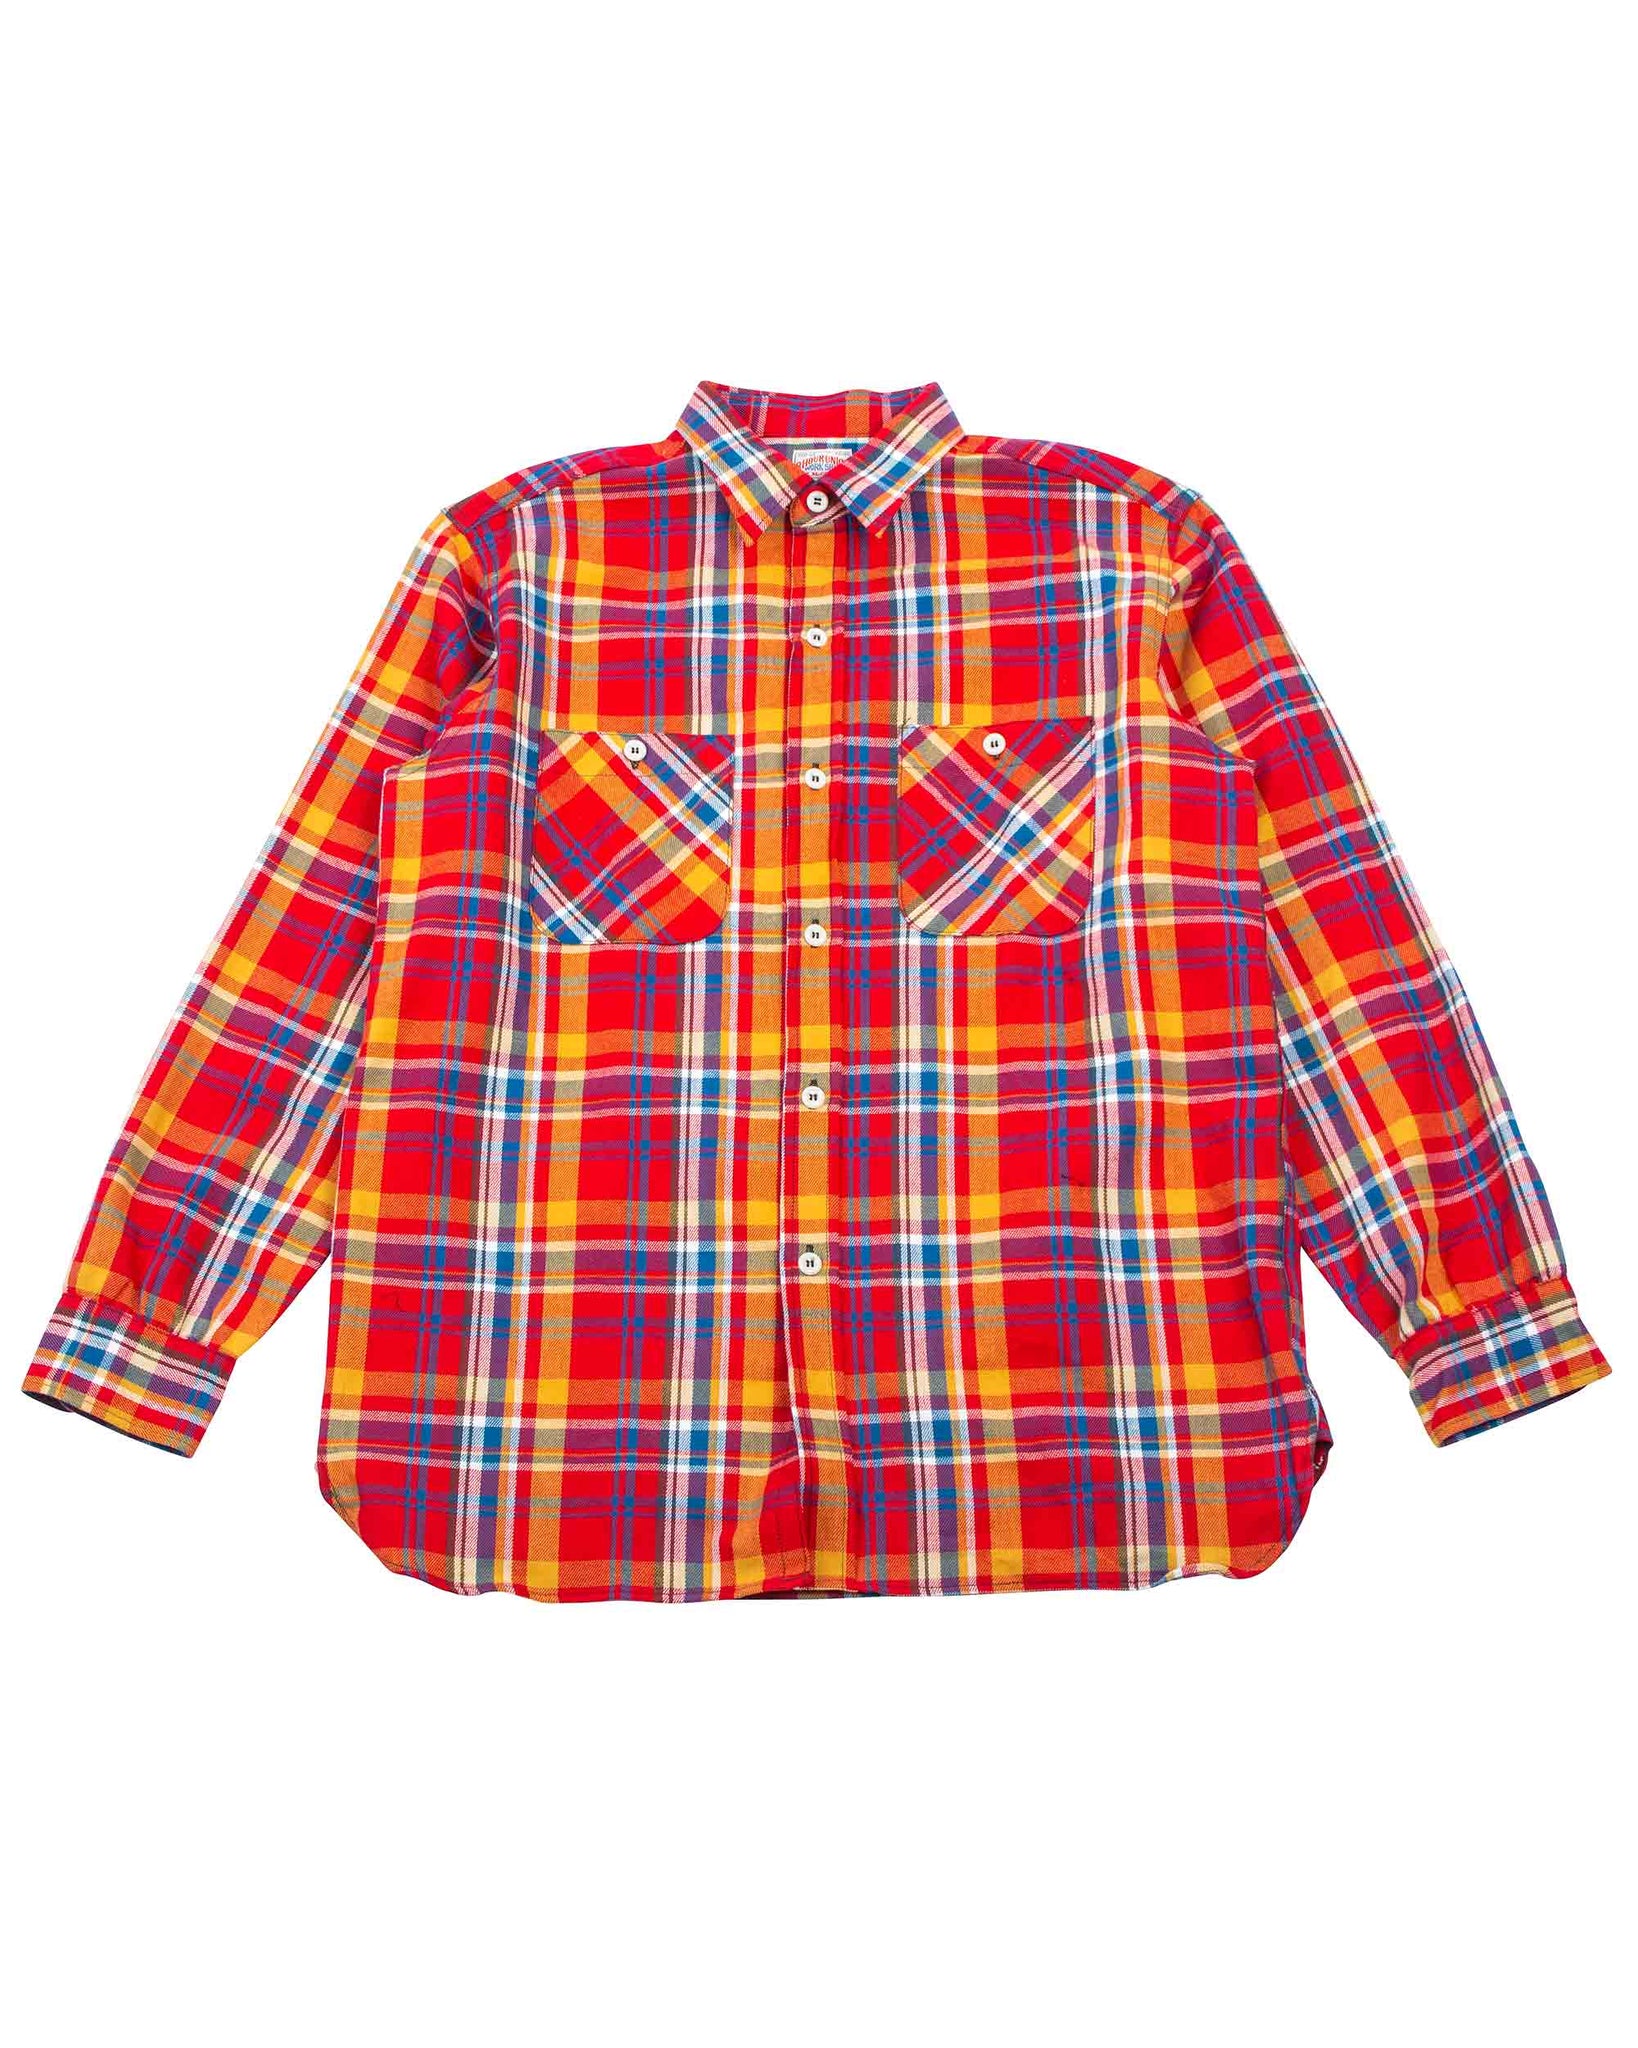 The Real McCoy's MS22005 8HU Check Flannel Shirt Red